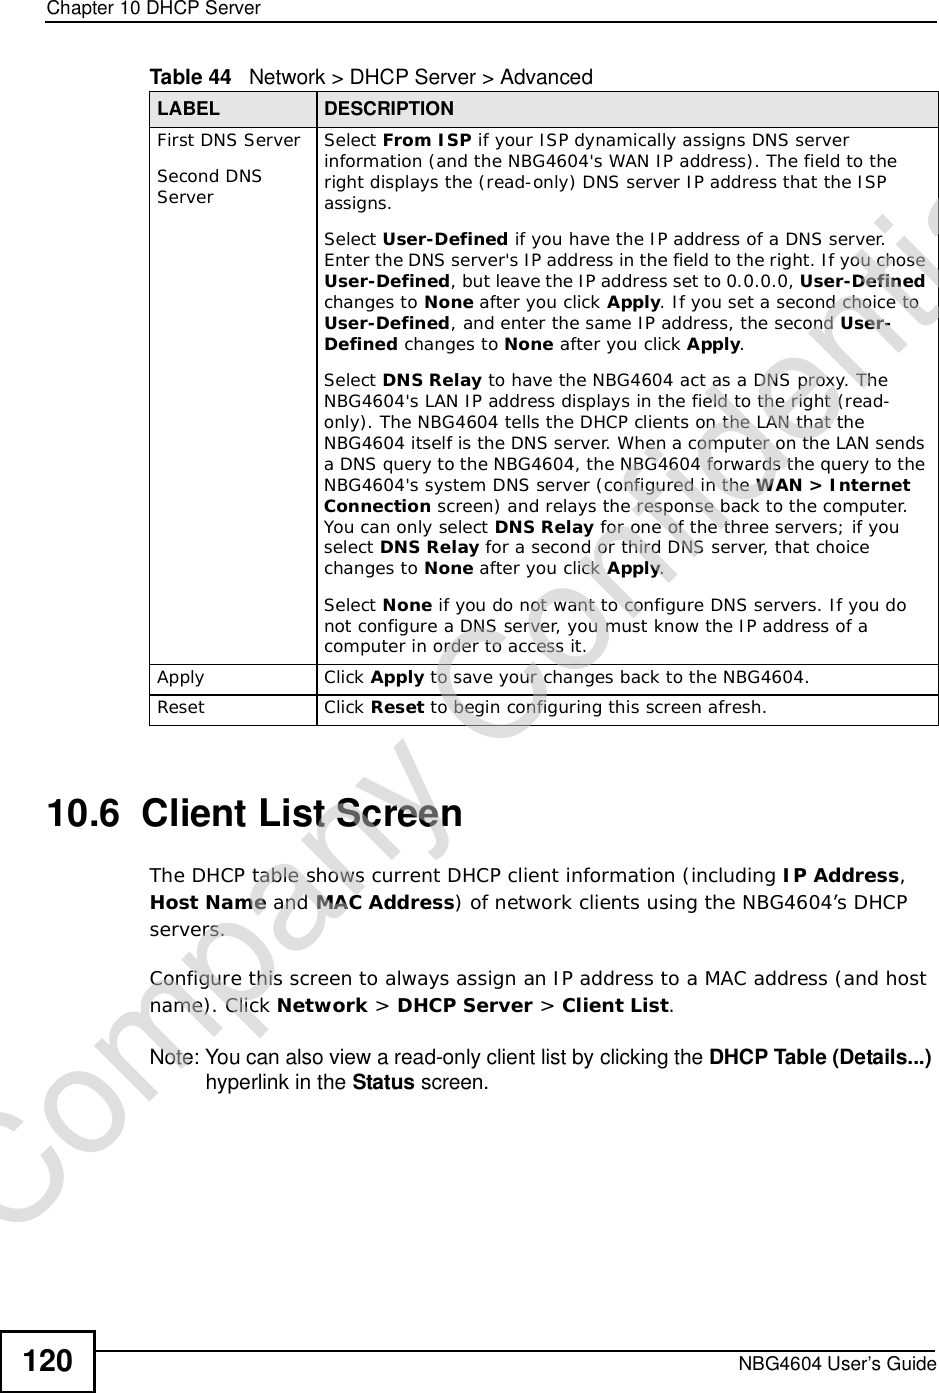 Chapter 10DHCP ServerNBG4604 User’s Guide12010.6  Client List ScreenThe DHCP table shows current DHCP client information (including IP Address,HostName and MAC Address) of network clients using the NBG4604’s DHCP servers.Configure this screen to always assign an IP address to a MAC address (and host name). Click Network &gt; DHCP Server &gt; Client List.Note: You can also view a read-only client list by clicking the DHCP Table (Details...) hyperlink in the Status screen. First DNS ServerSecond DNS ServerSelect From ISP if your ISP dynamically assigns DNS server information (and the NBG4604&apos;s WAN IP address). The field to the right displays the (read-only) DNS server IP address that the ISP assigns.Select User-Defined if you have the IP address of a DNS server. Enter the DNS server&apos;s IP address in the field to the right. If you chose User-Defined, but leave the IP address set to 0.0.0.0, User-Defined changes to None after you click Apply. If you set a second choice to User-Defined, and enter the same IP address, the second User-Defined changes to None after you click Apply.Select DNS Relay to have the NBG4604 act as a DNS proxy. The NBG4604&apos;s LAN IP address displays in the field to the right (read-only). The NBG4604 tells the DHCP clients on the LAN that the NBG4604 itself is the DNS server. When a computer on the LAN sends a DNS query to the NBG4604, the NBG4604 forwards the query to the NBG4604&apos;s system DNS server (configured in the WAN &gt; Internet Connection screen) and relays the response back to the computer. You can only select DNS Relay for one of the three servers; if you select DNS Relay for a second or third DNS server, that choice changes to None after you click Apply.Select None if you do not want to configure DNS servers. If you do not configure a DNS server, you must know the IP address of a computer in order to access it.Apply Click Apply to save your changes back to the NBG4604.Reset Click Reset to begin configuring this screen afresh.Table 44   Network &gt; DHCP Server &gt; AdvancedLABEL DESCRIPTIONCompany Confidential